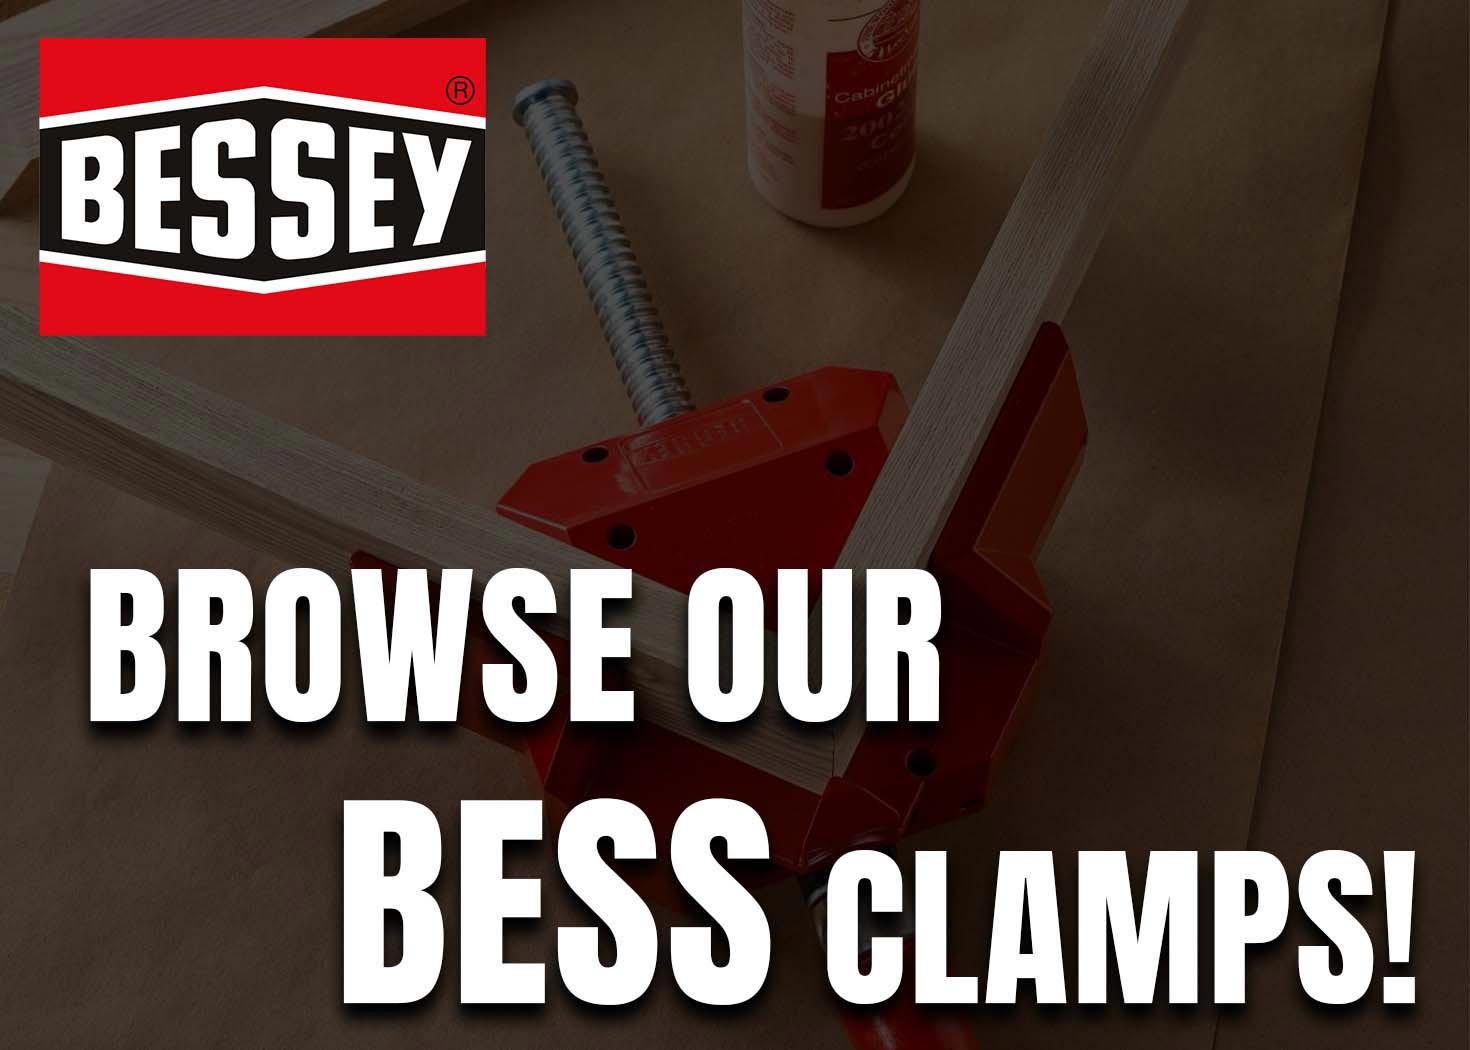 BESS CLAMPS